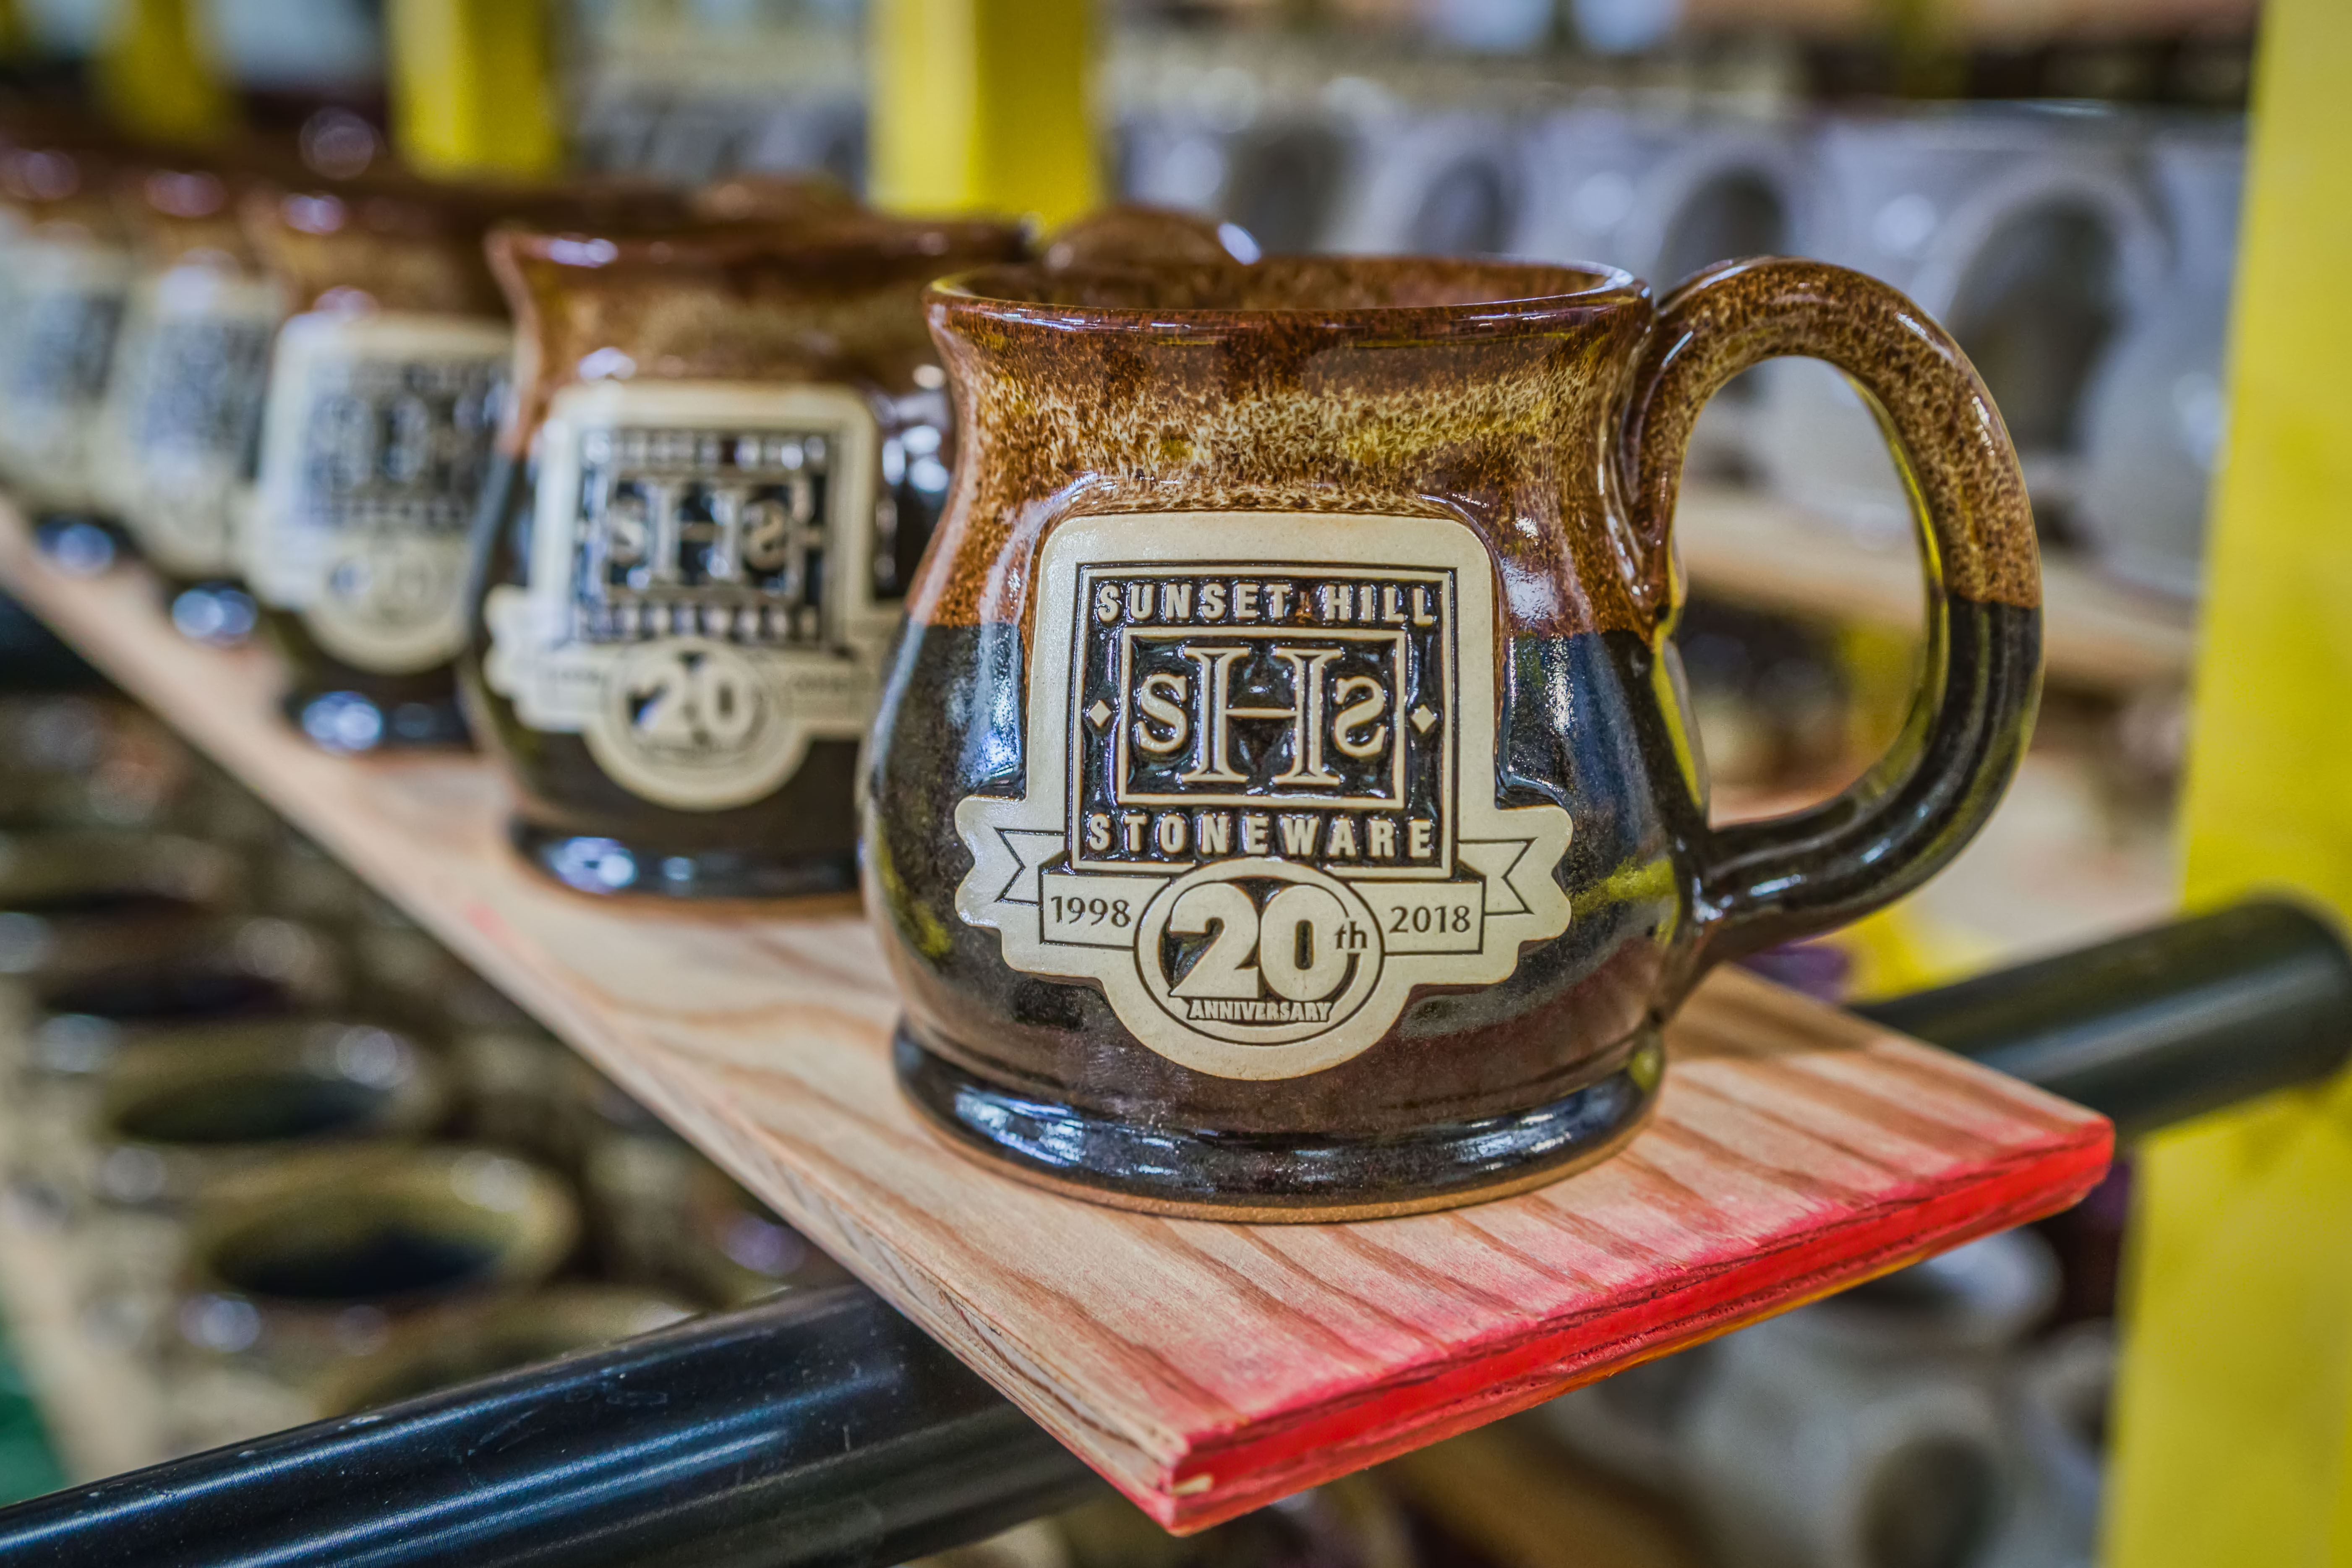 Introducing the Sunset Hill Stoneware Online Store